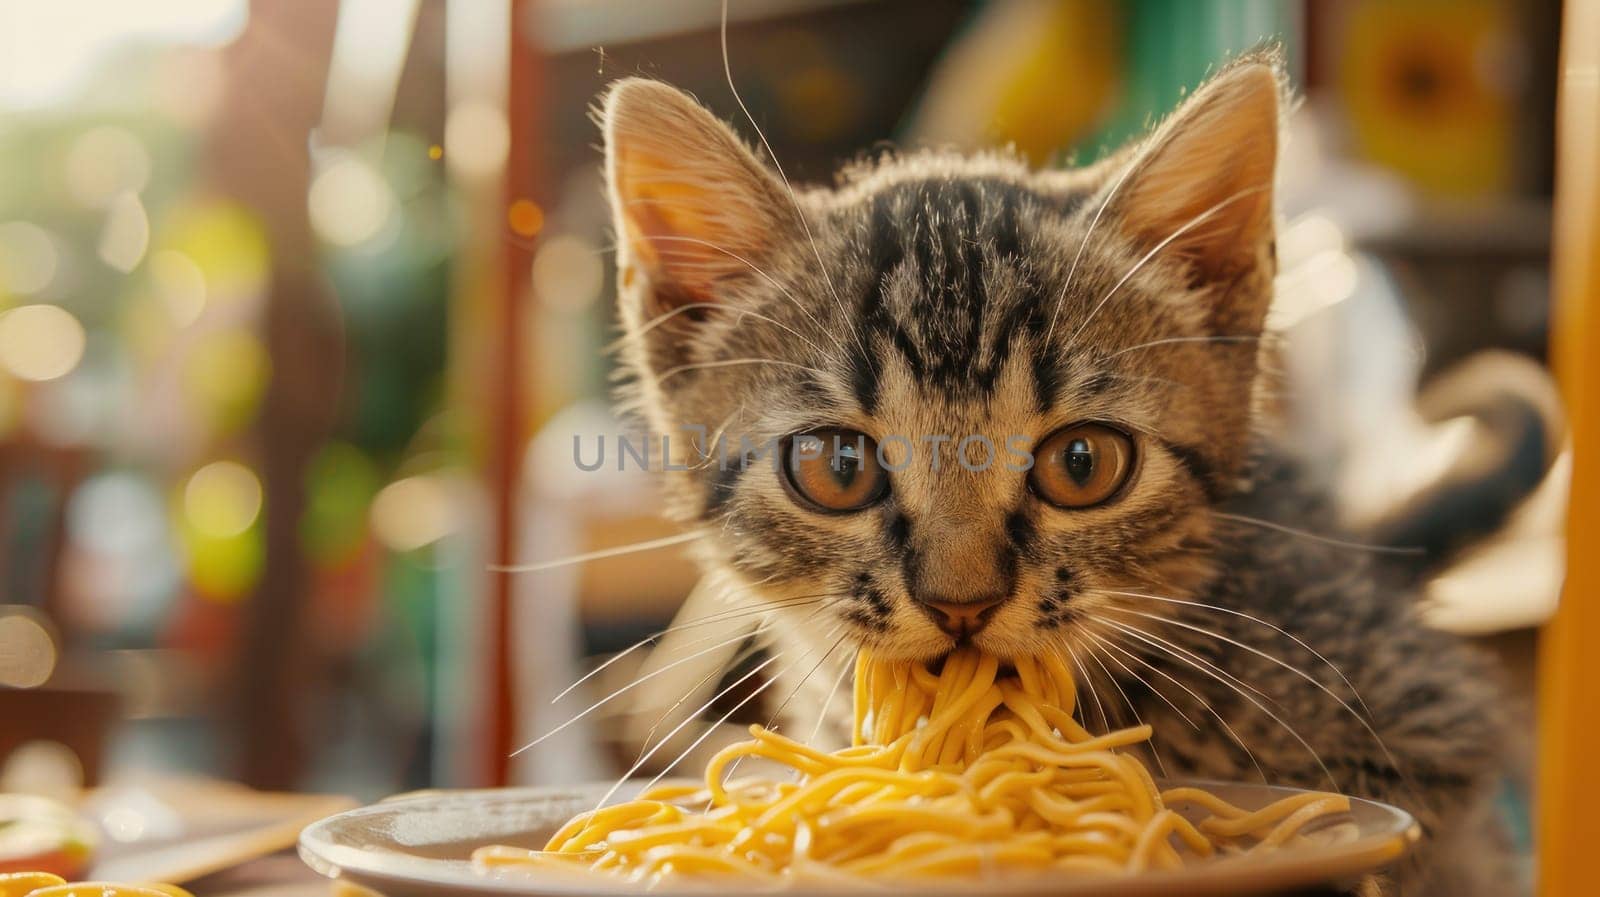 A cat is eating spaghetti on a plate.